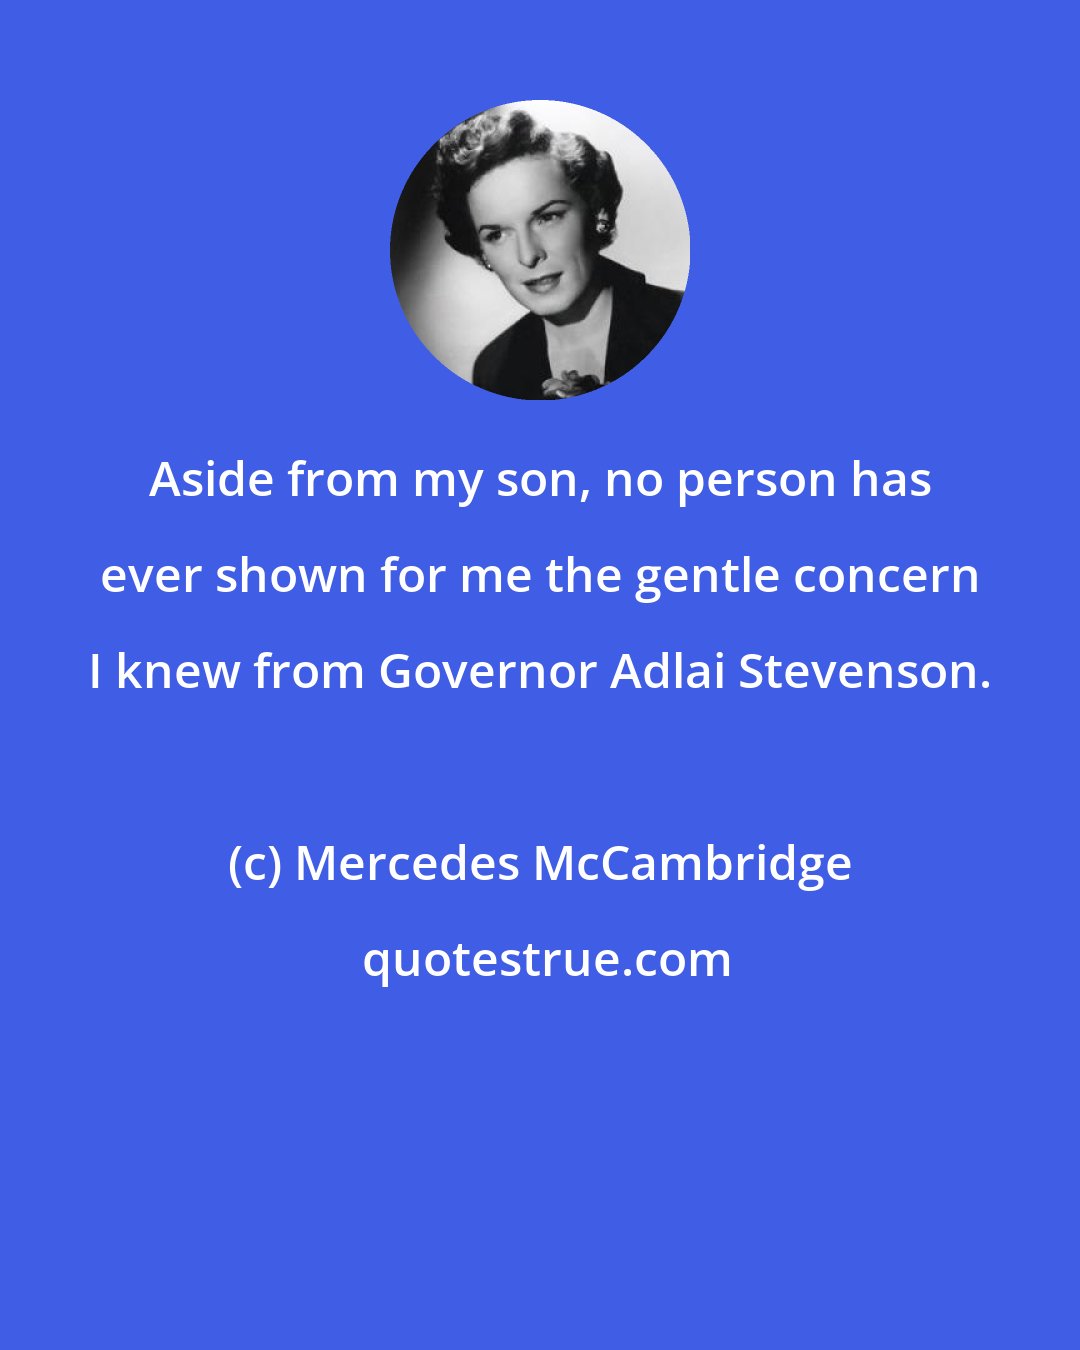 Mercedes McCambridge: Aside from my son, no person has ever shown for me the gentle concern I knew from Governor Adlai Stevenson.